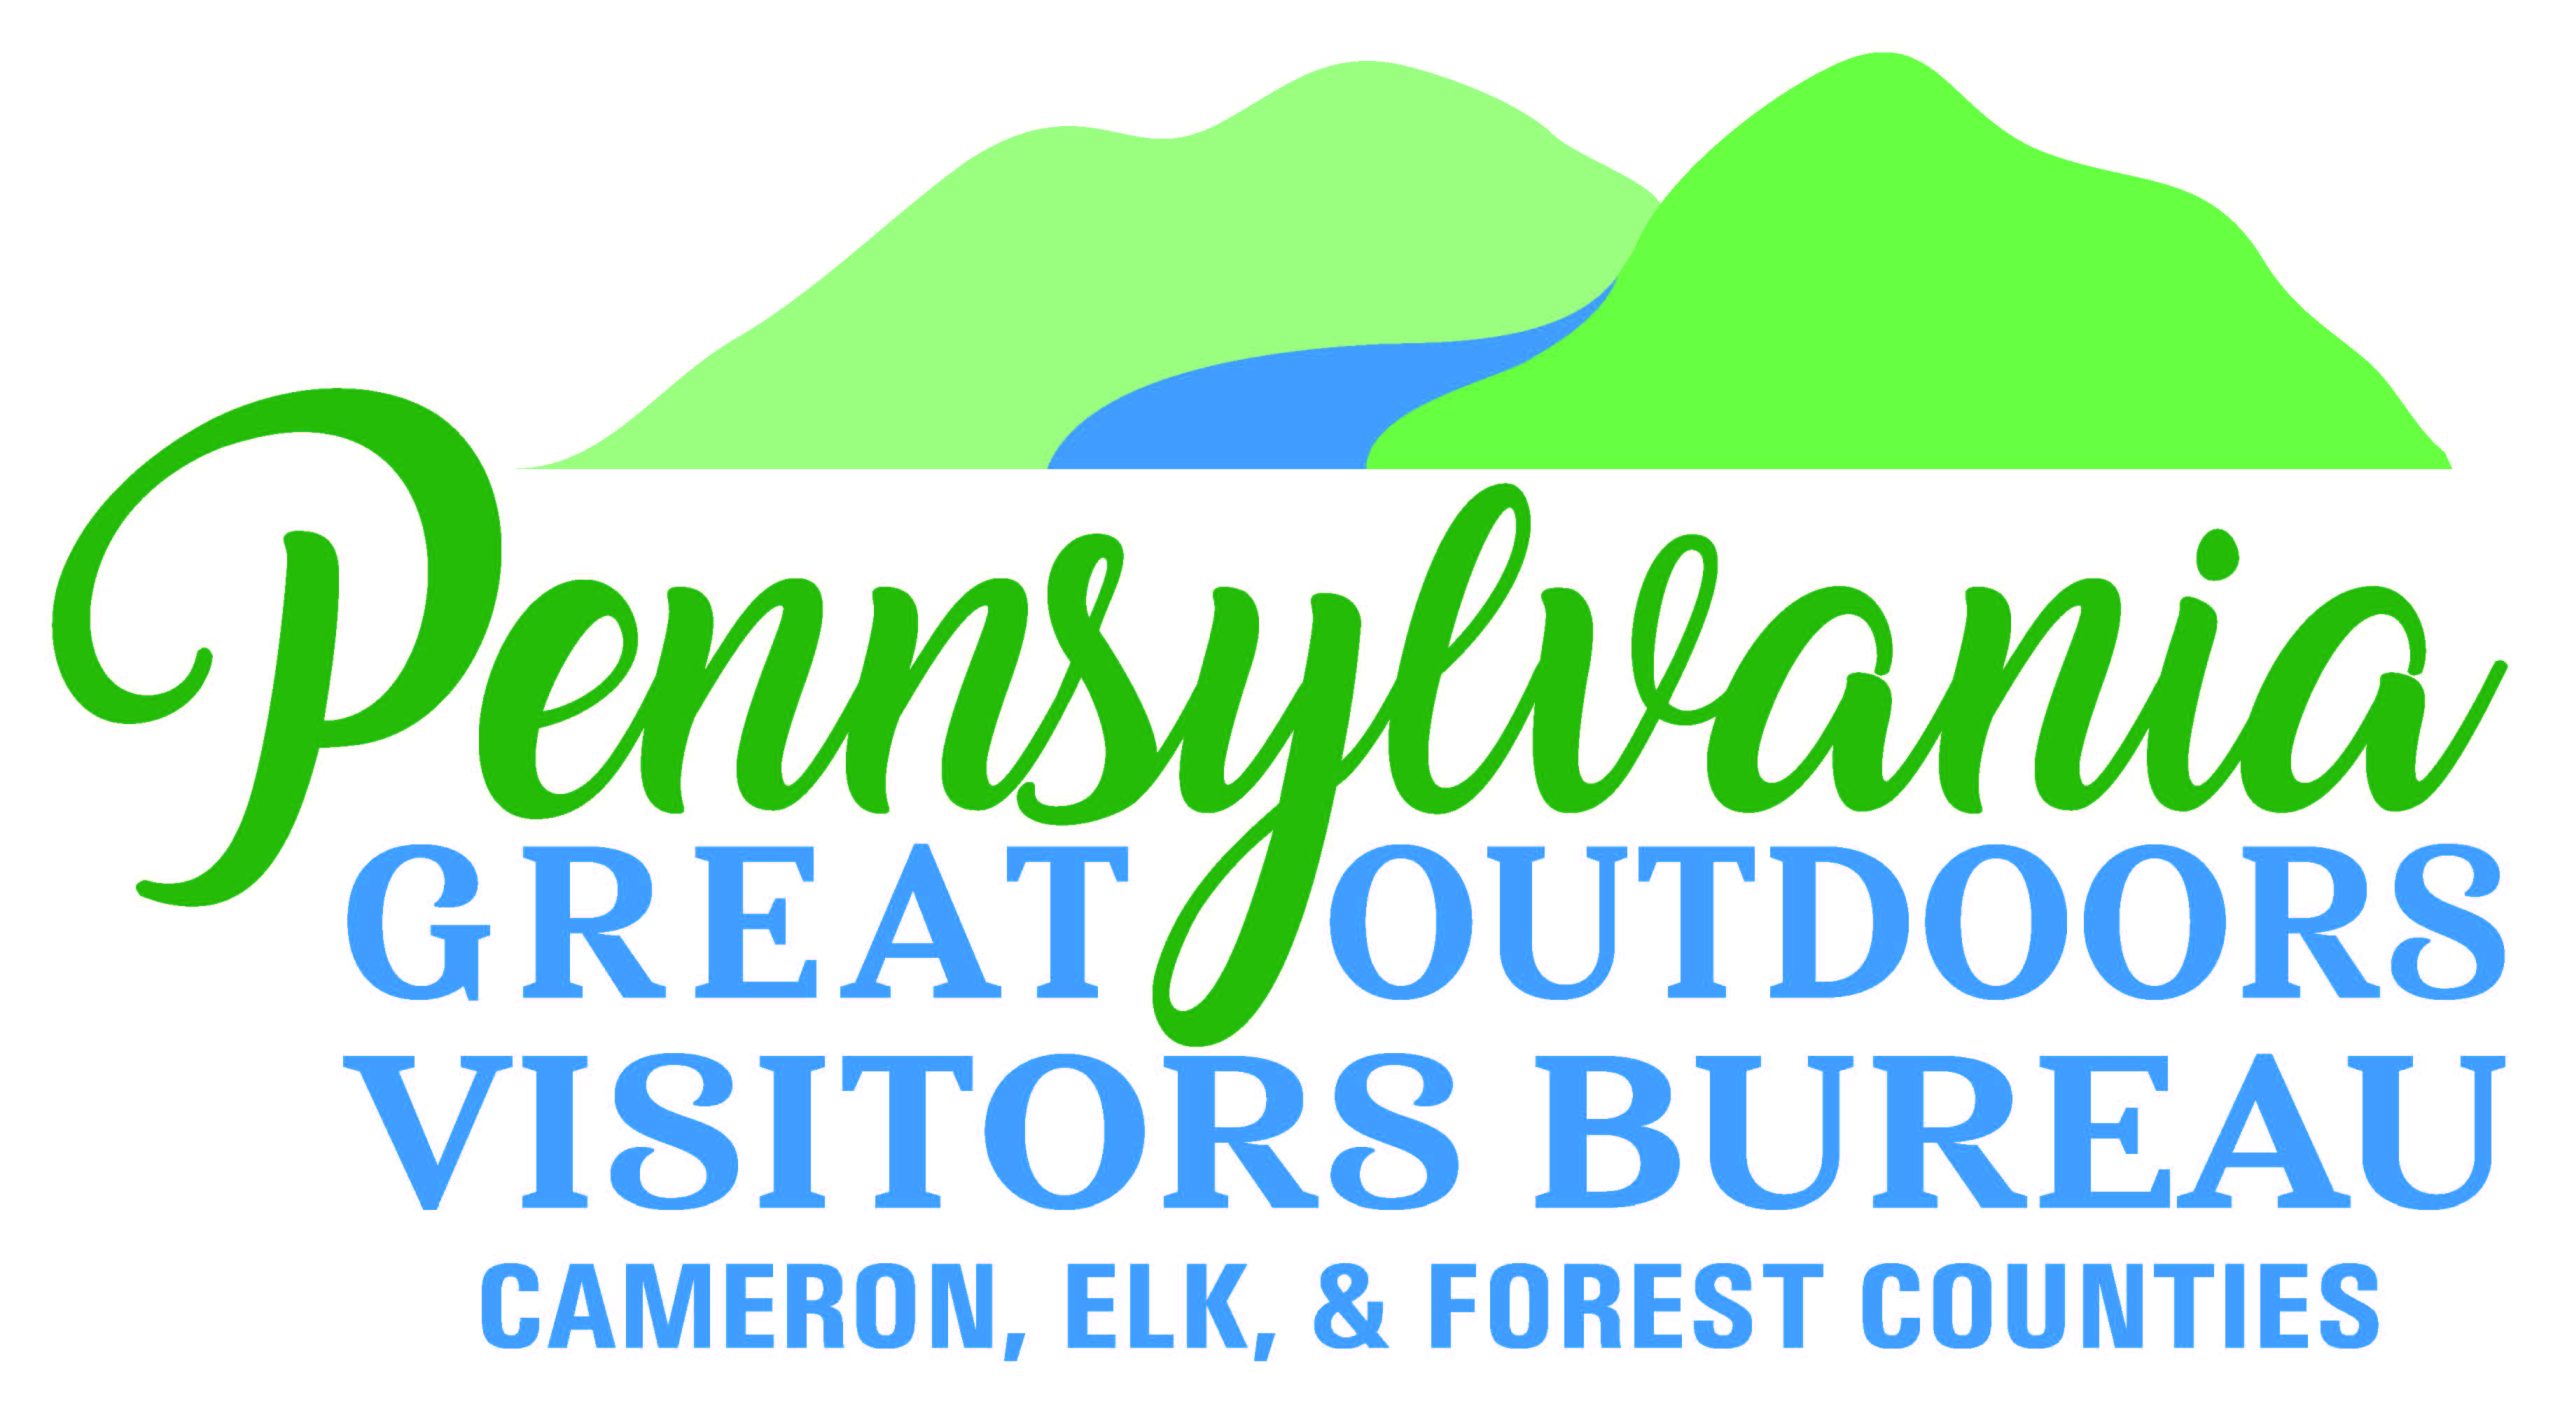 Visit PA Great Outdoors